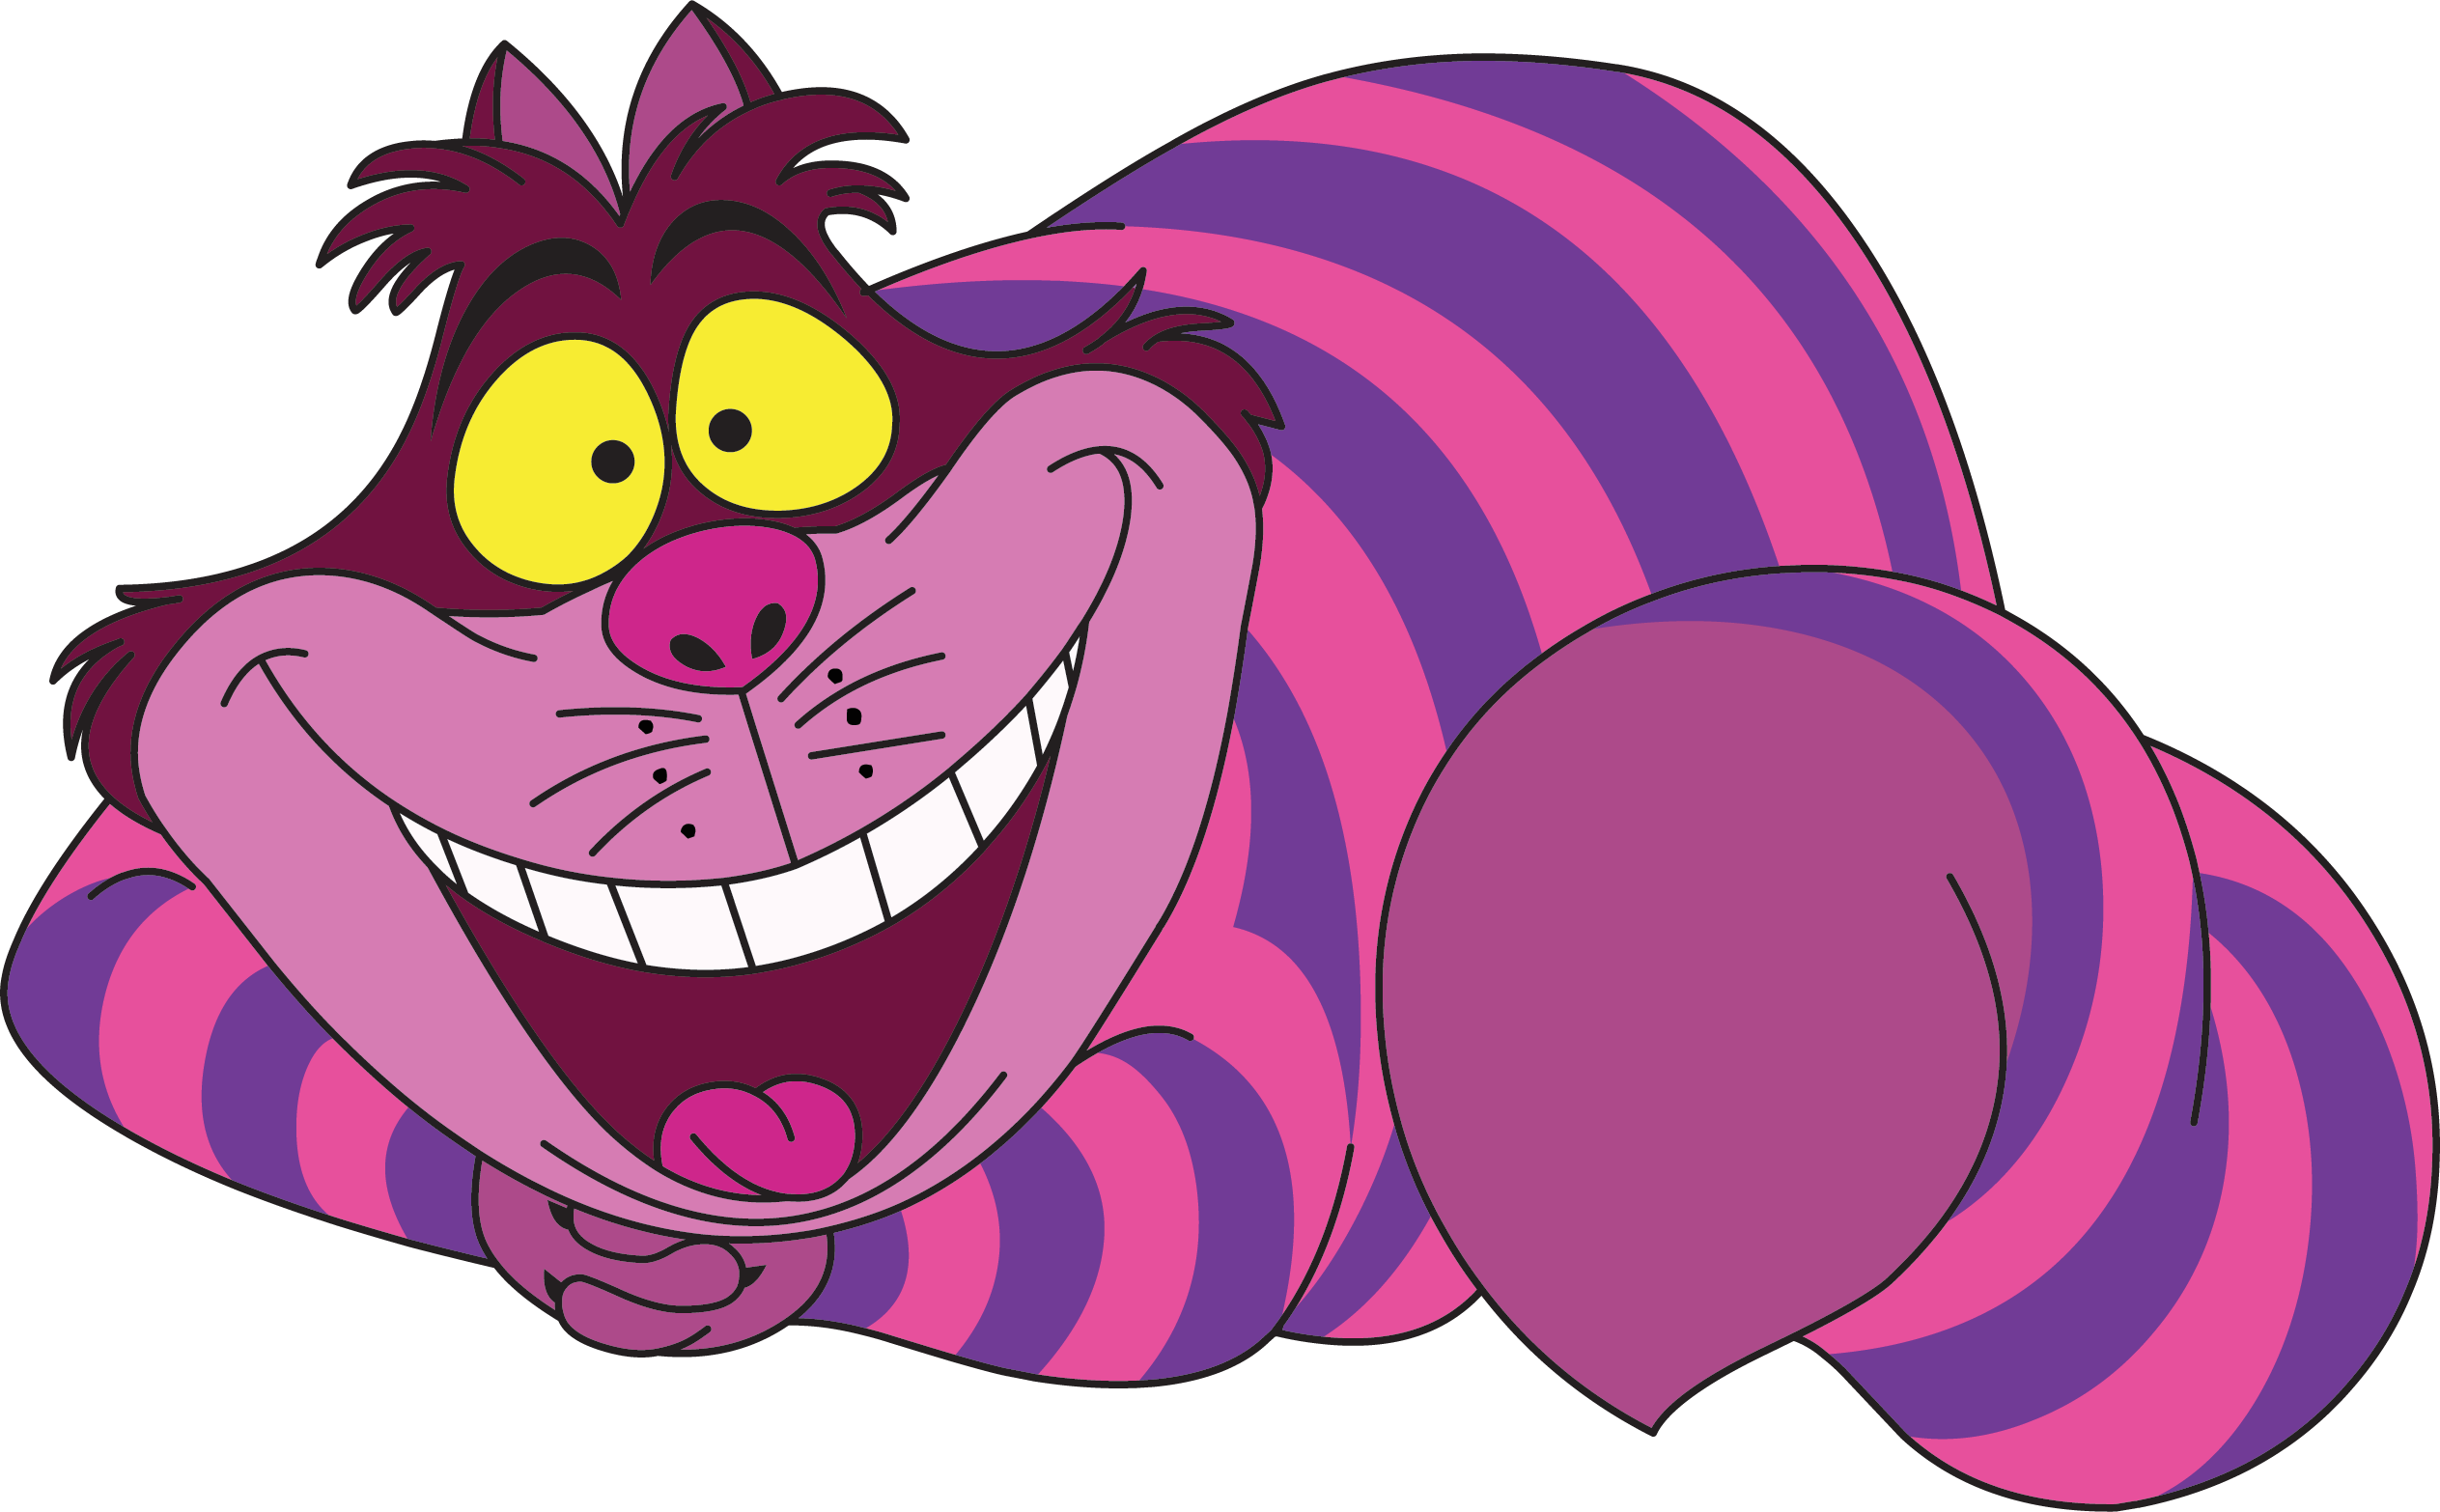 cheshire-cat-svg-download-cheshire-cat-svg-for-free-2019